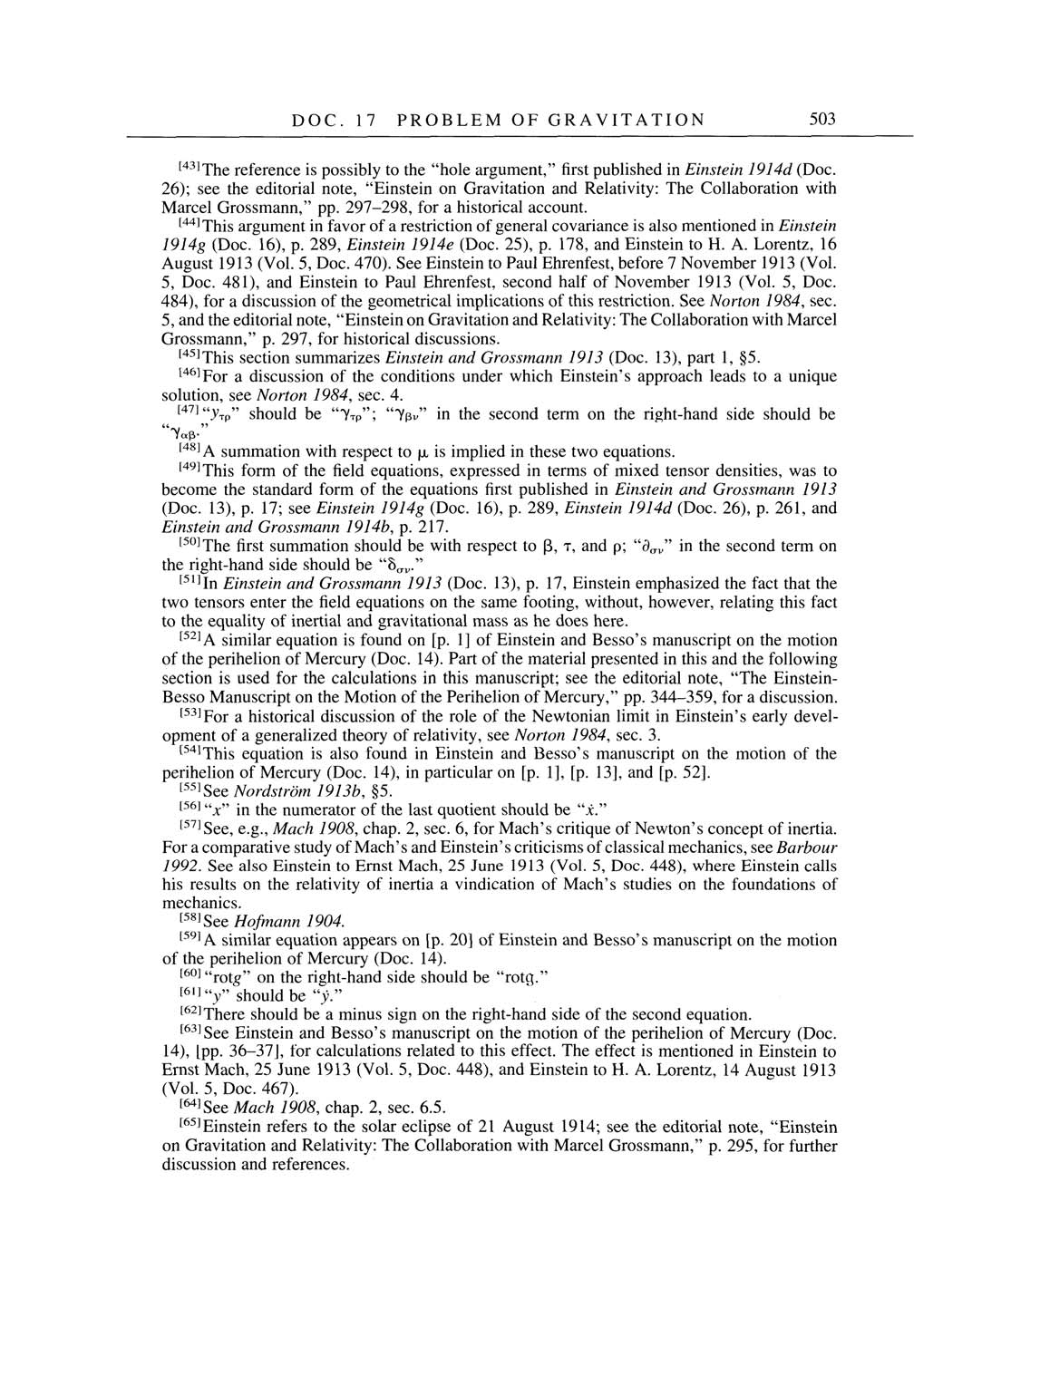 Volume 4: The Swiss Years: Writings 1912-1914 page 503